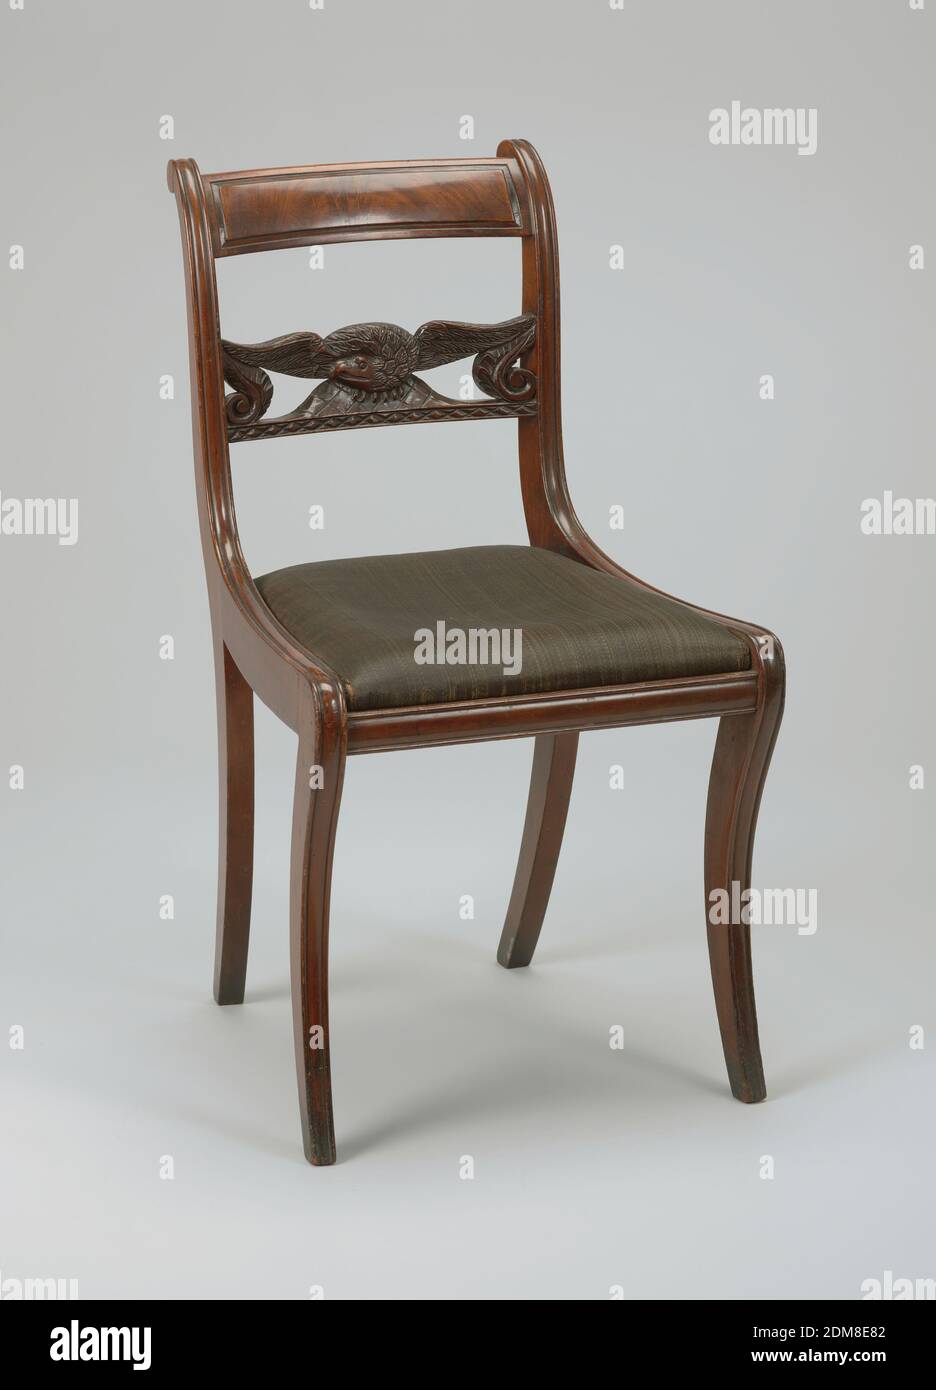 Chair, carved mahogany, Crozier posts include panelled top rail and slat carved in form of an eagle with wings outspread. Slip seat covered in horsehair. Flat front legs are moulded on front surface and are sharply curved. Rear legs are sharply curved as well., USA, 1820–25, furniture, Decorative Arts, Chair Stock Photo